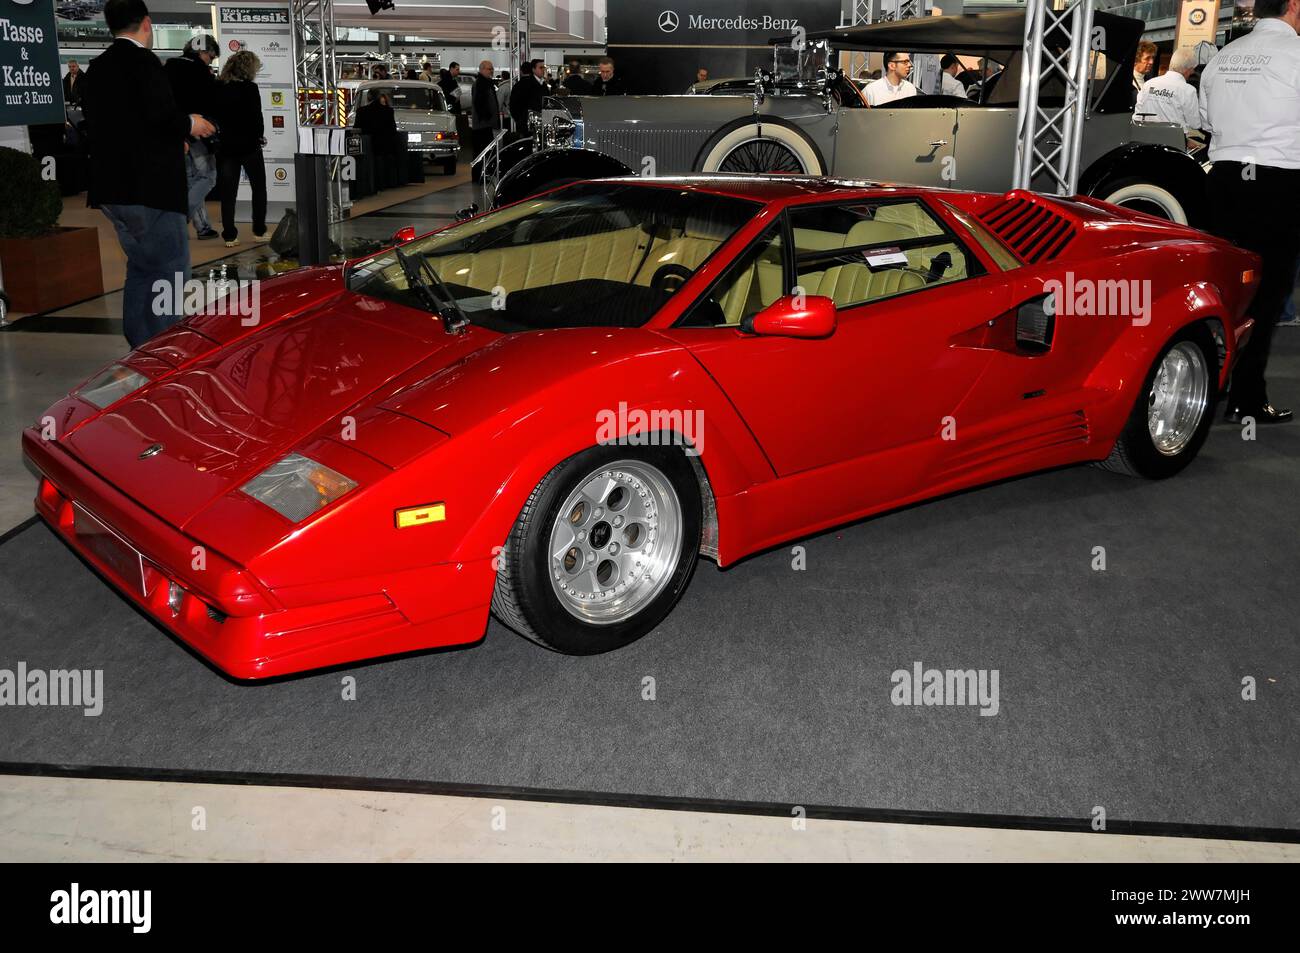 RETRO CLASSICS 2010, Stuttgart Messe, Red sports car, Lamborghini, with flat design and eye-catching wings in an exhibition, Stuttgart Messe Stock Photo